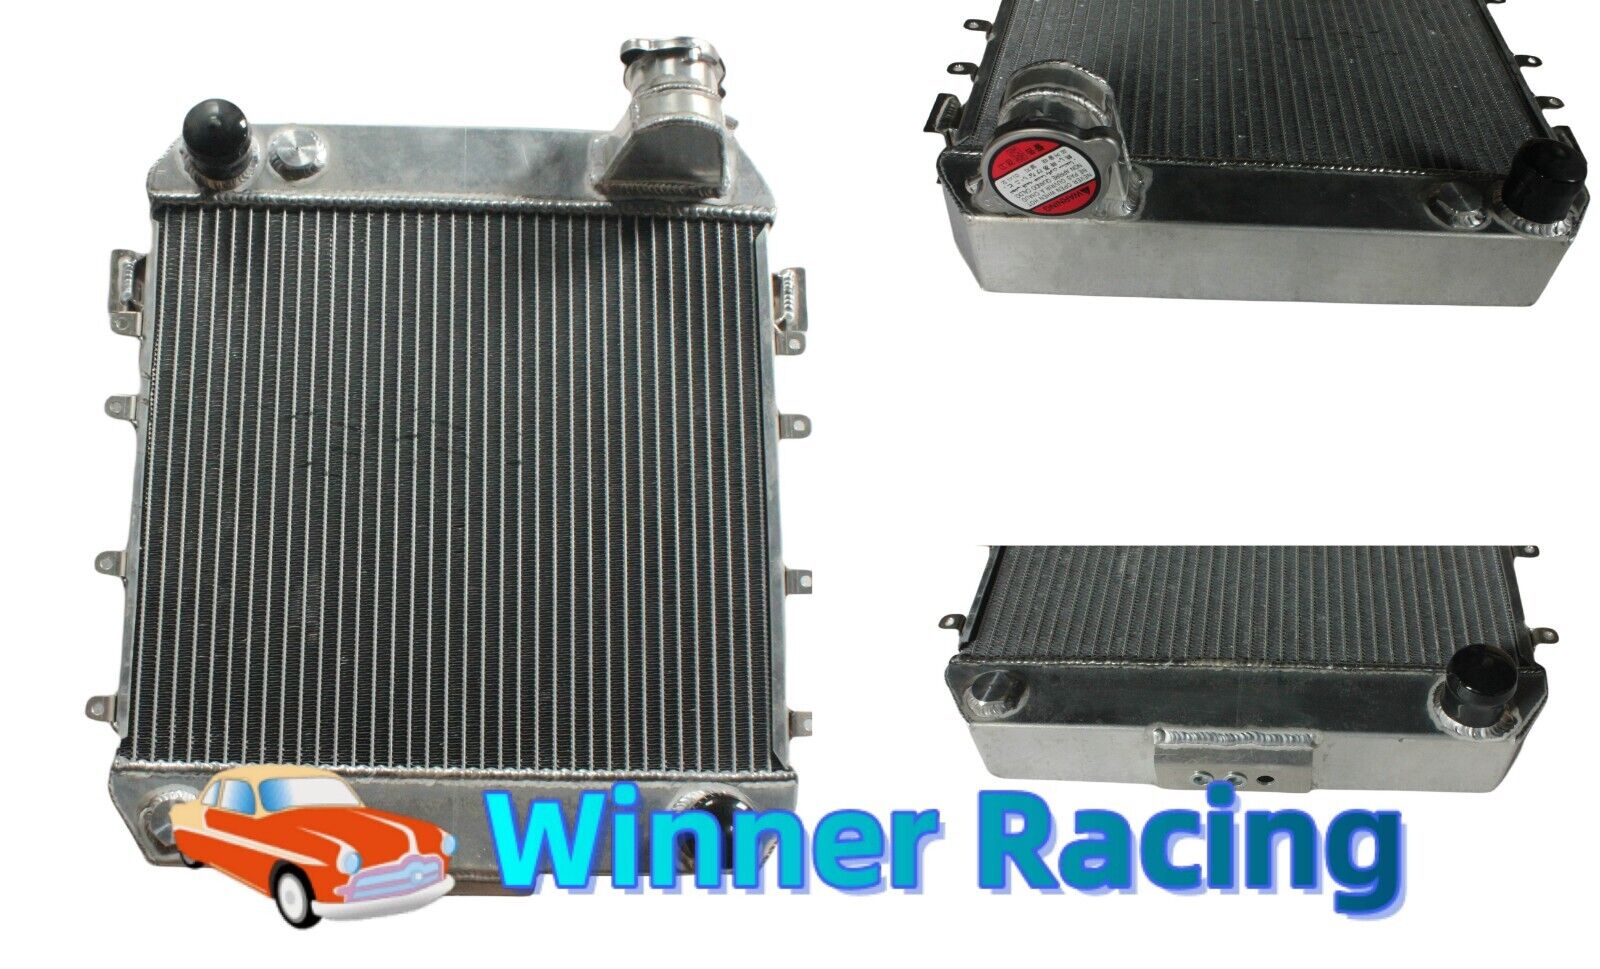 1302078 Radiator Fit Opel GT 1.9L 19S Coupe 1968-1973 All Aluminum